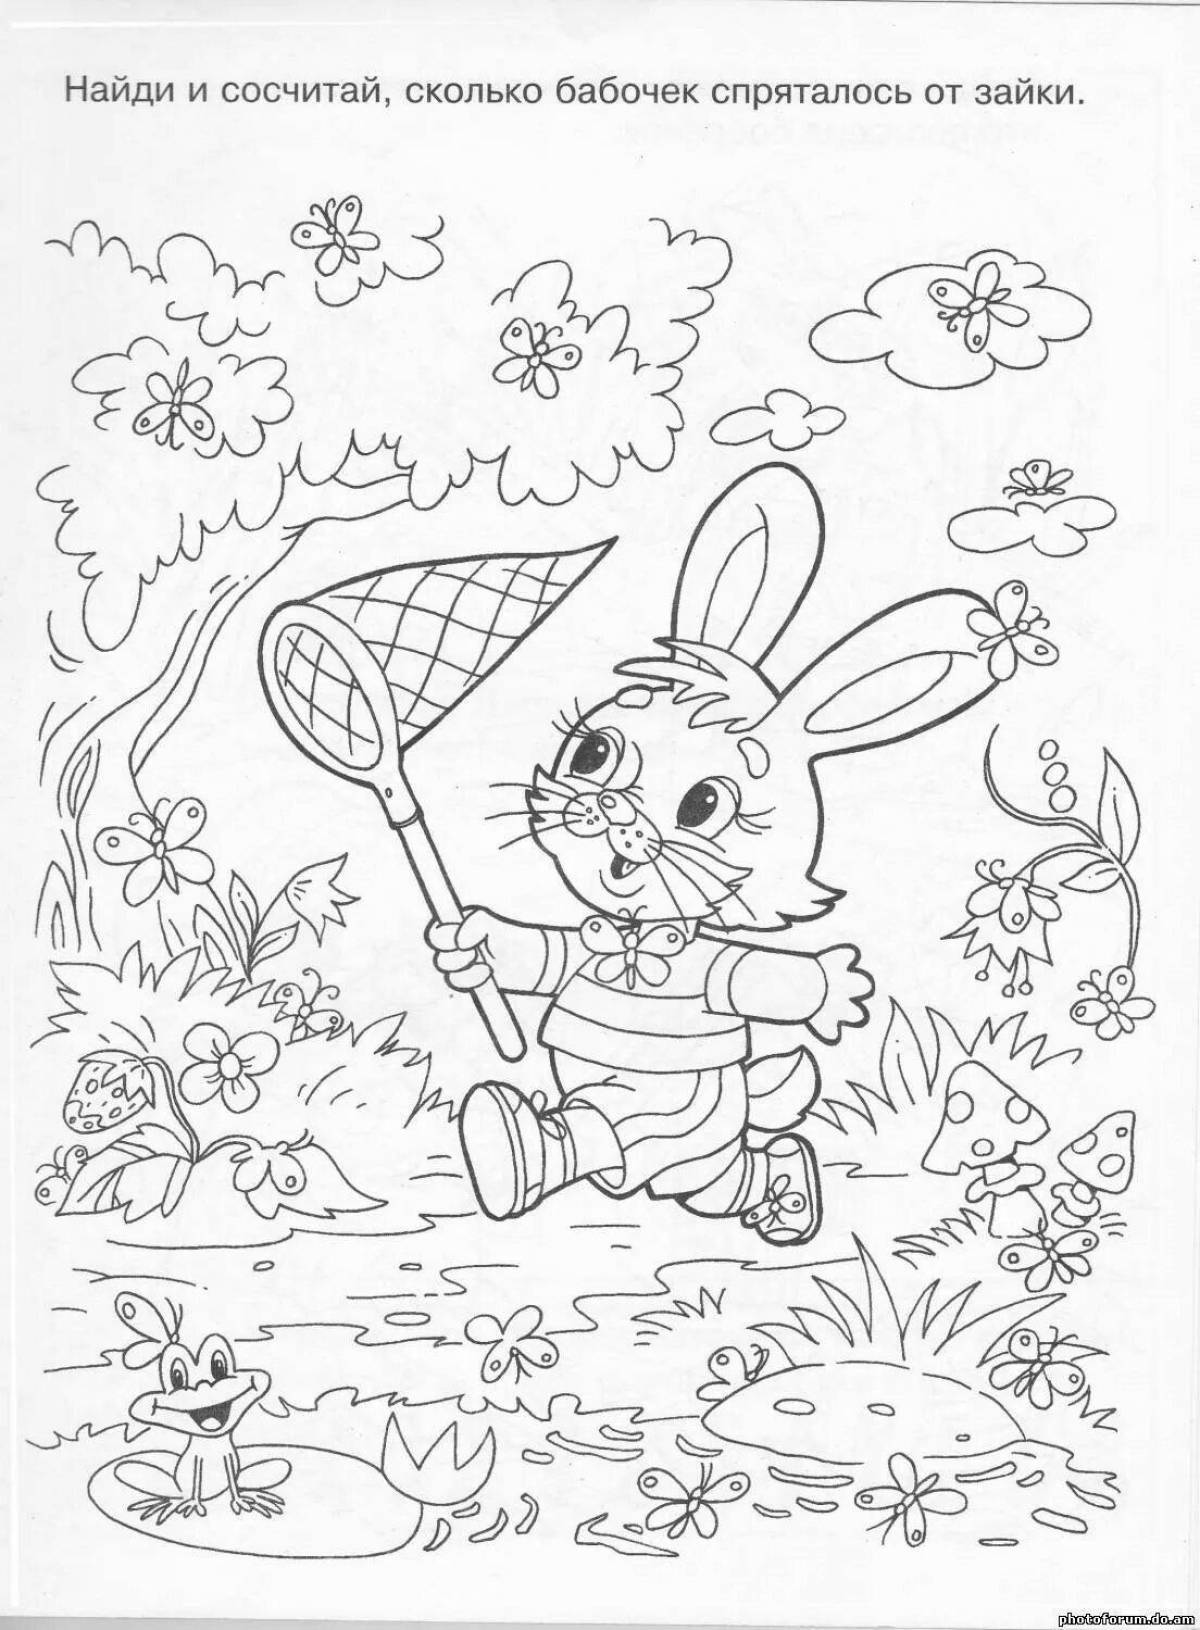 Fun coloring book smart for 4-5 year olds